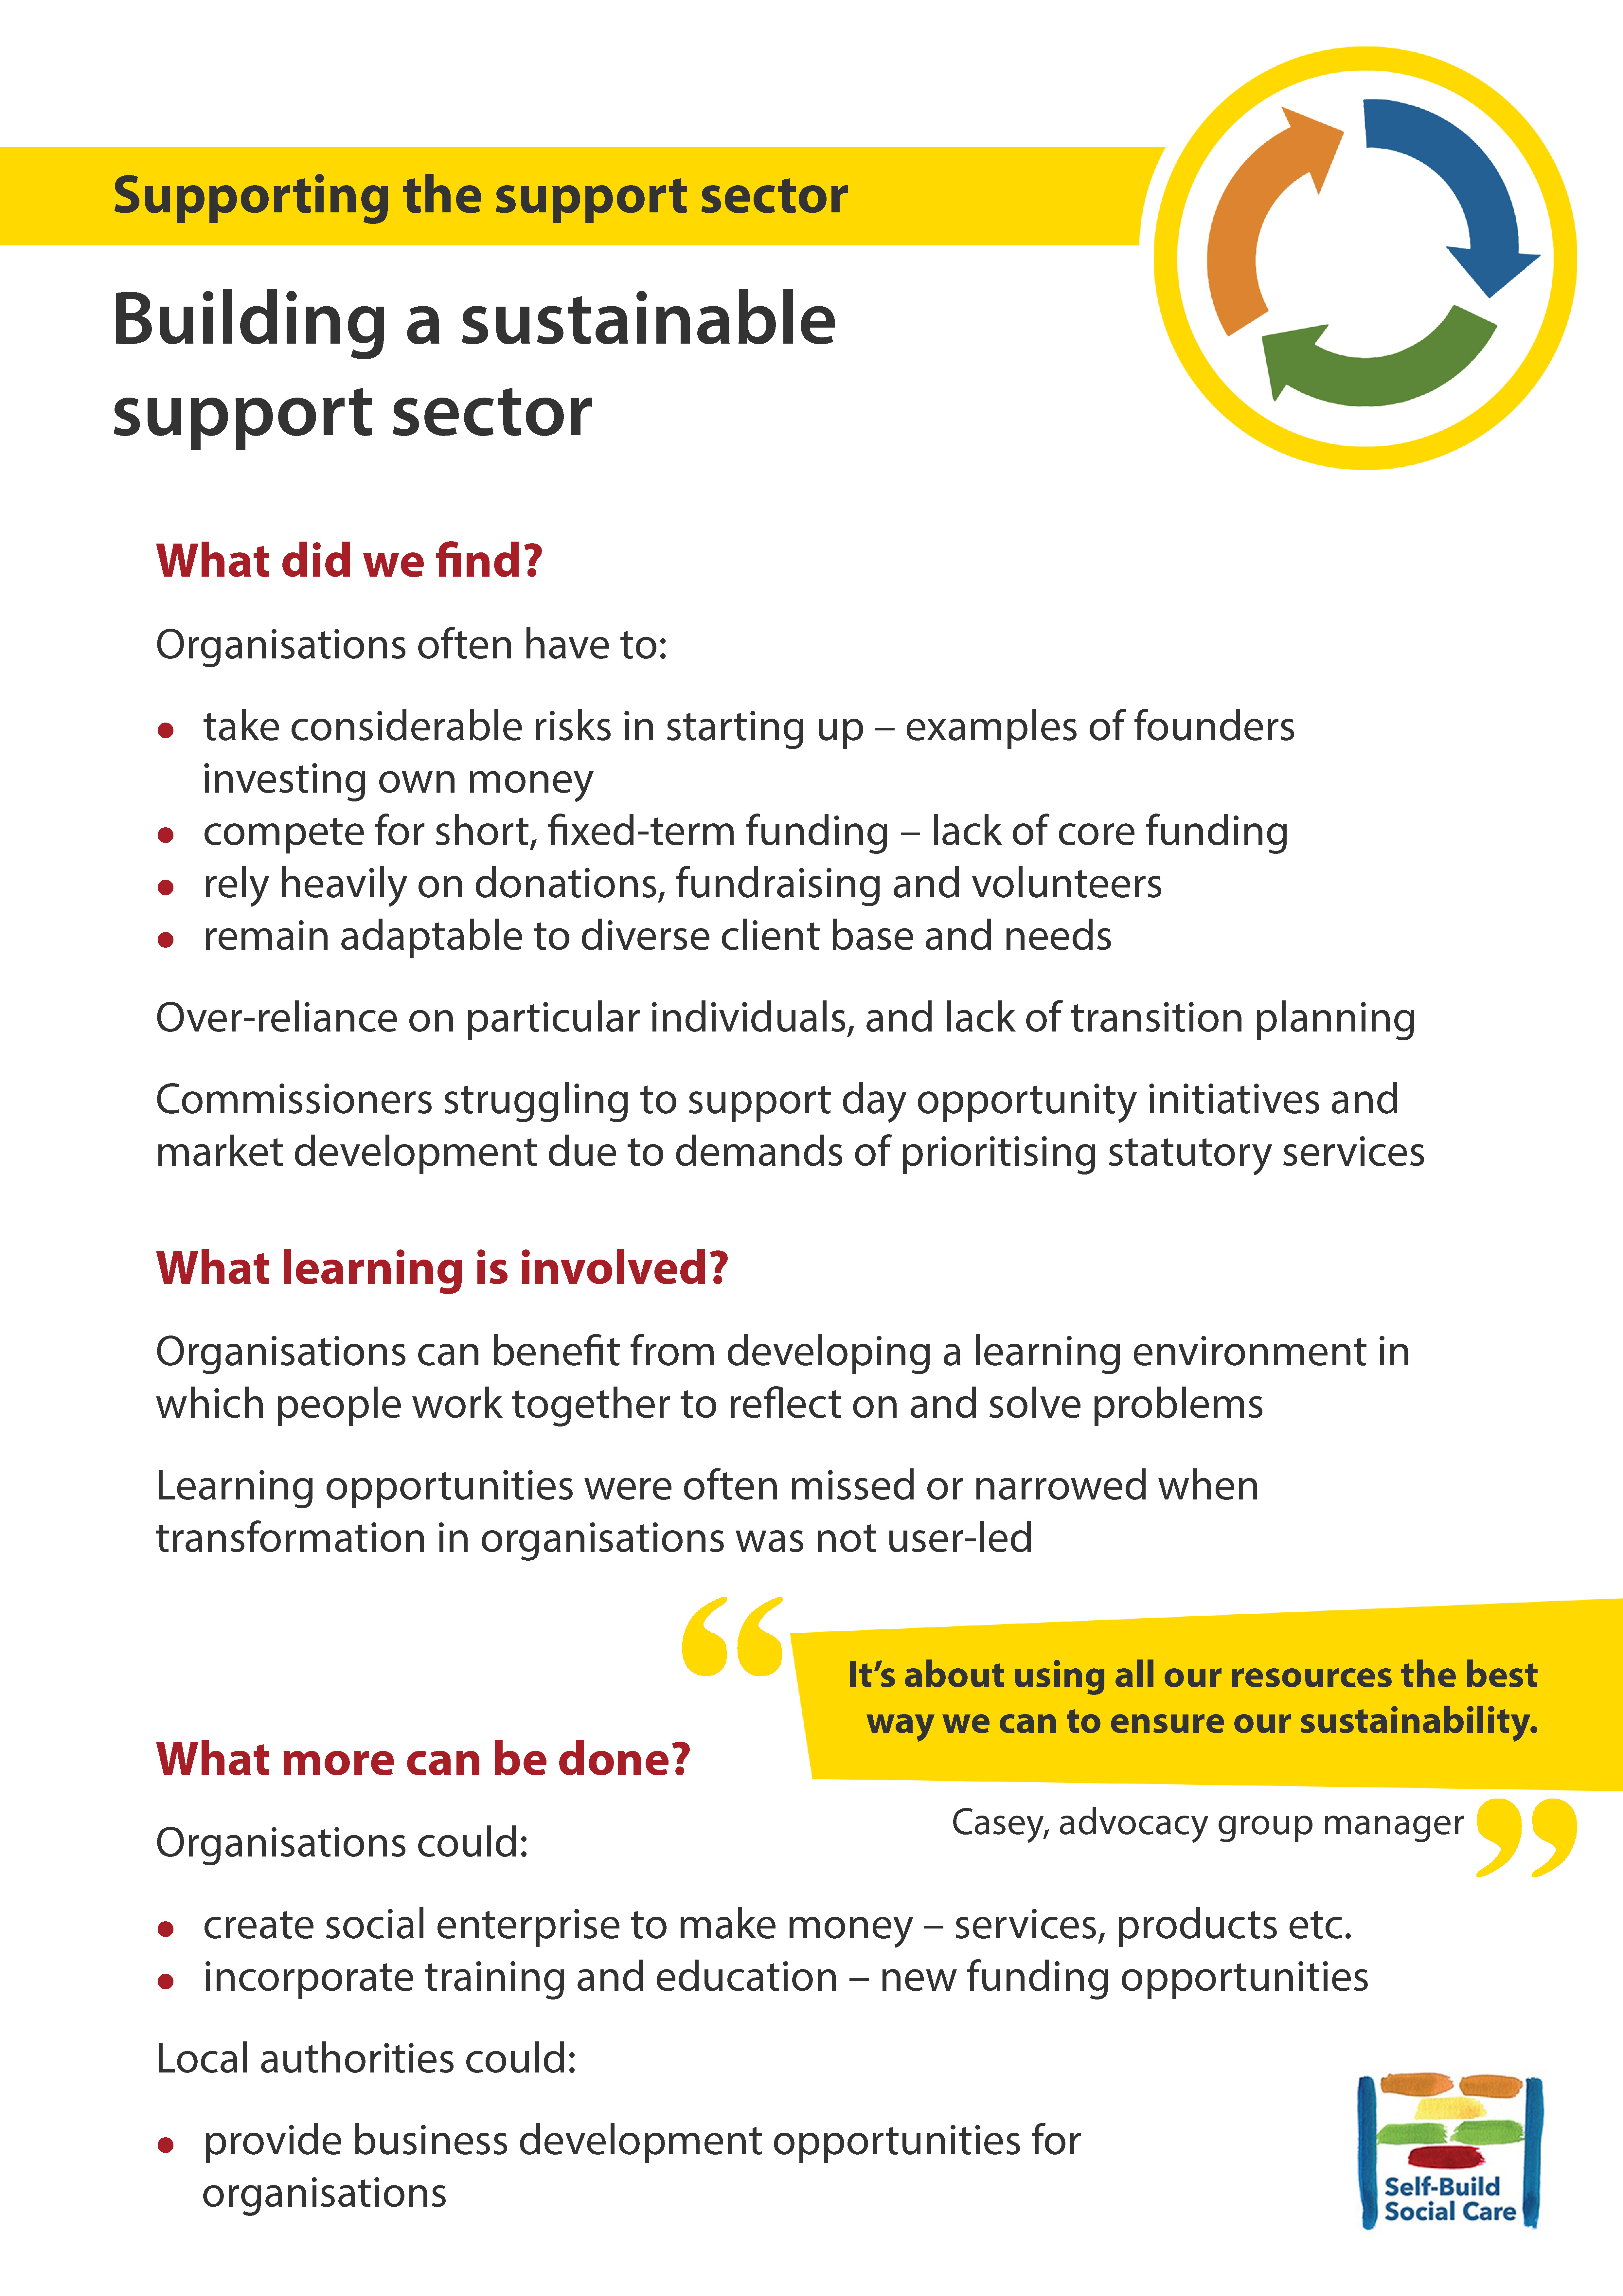 Building a sustainable support sector